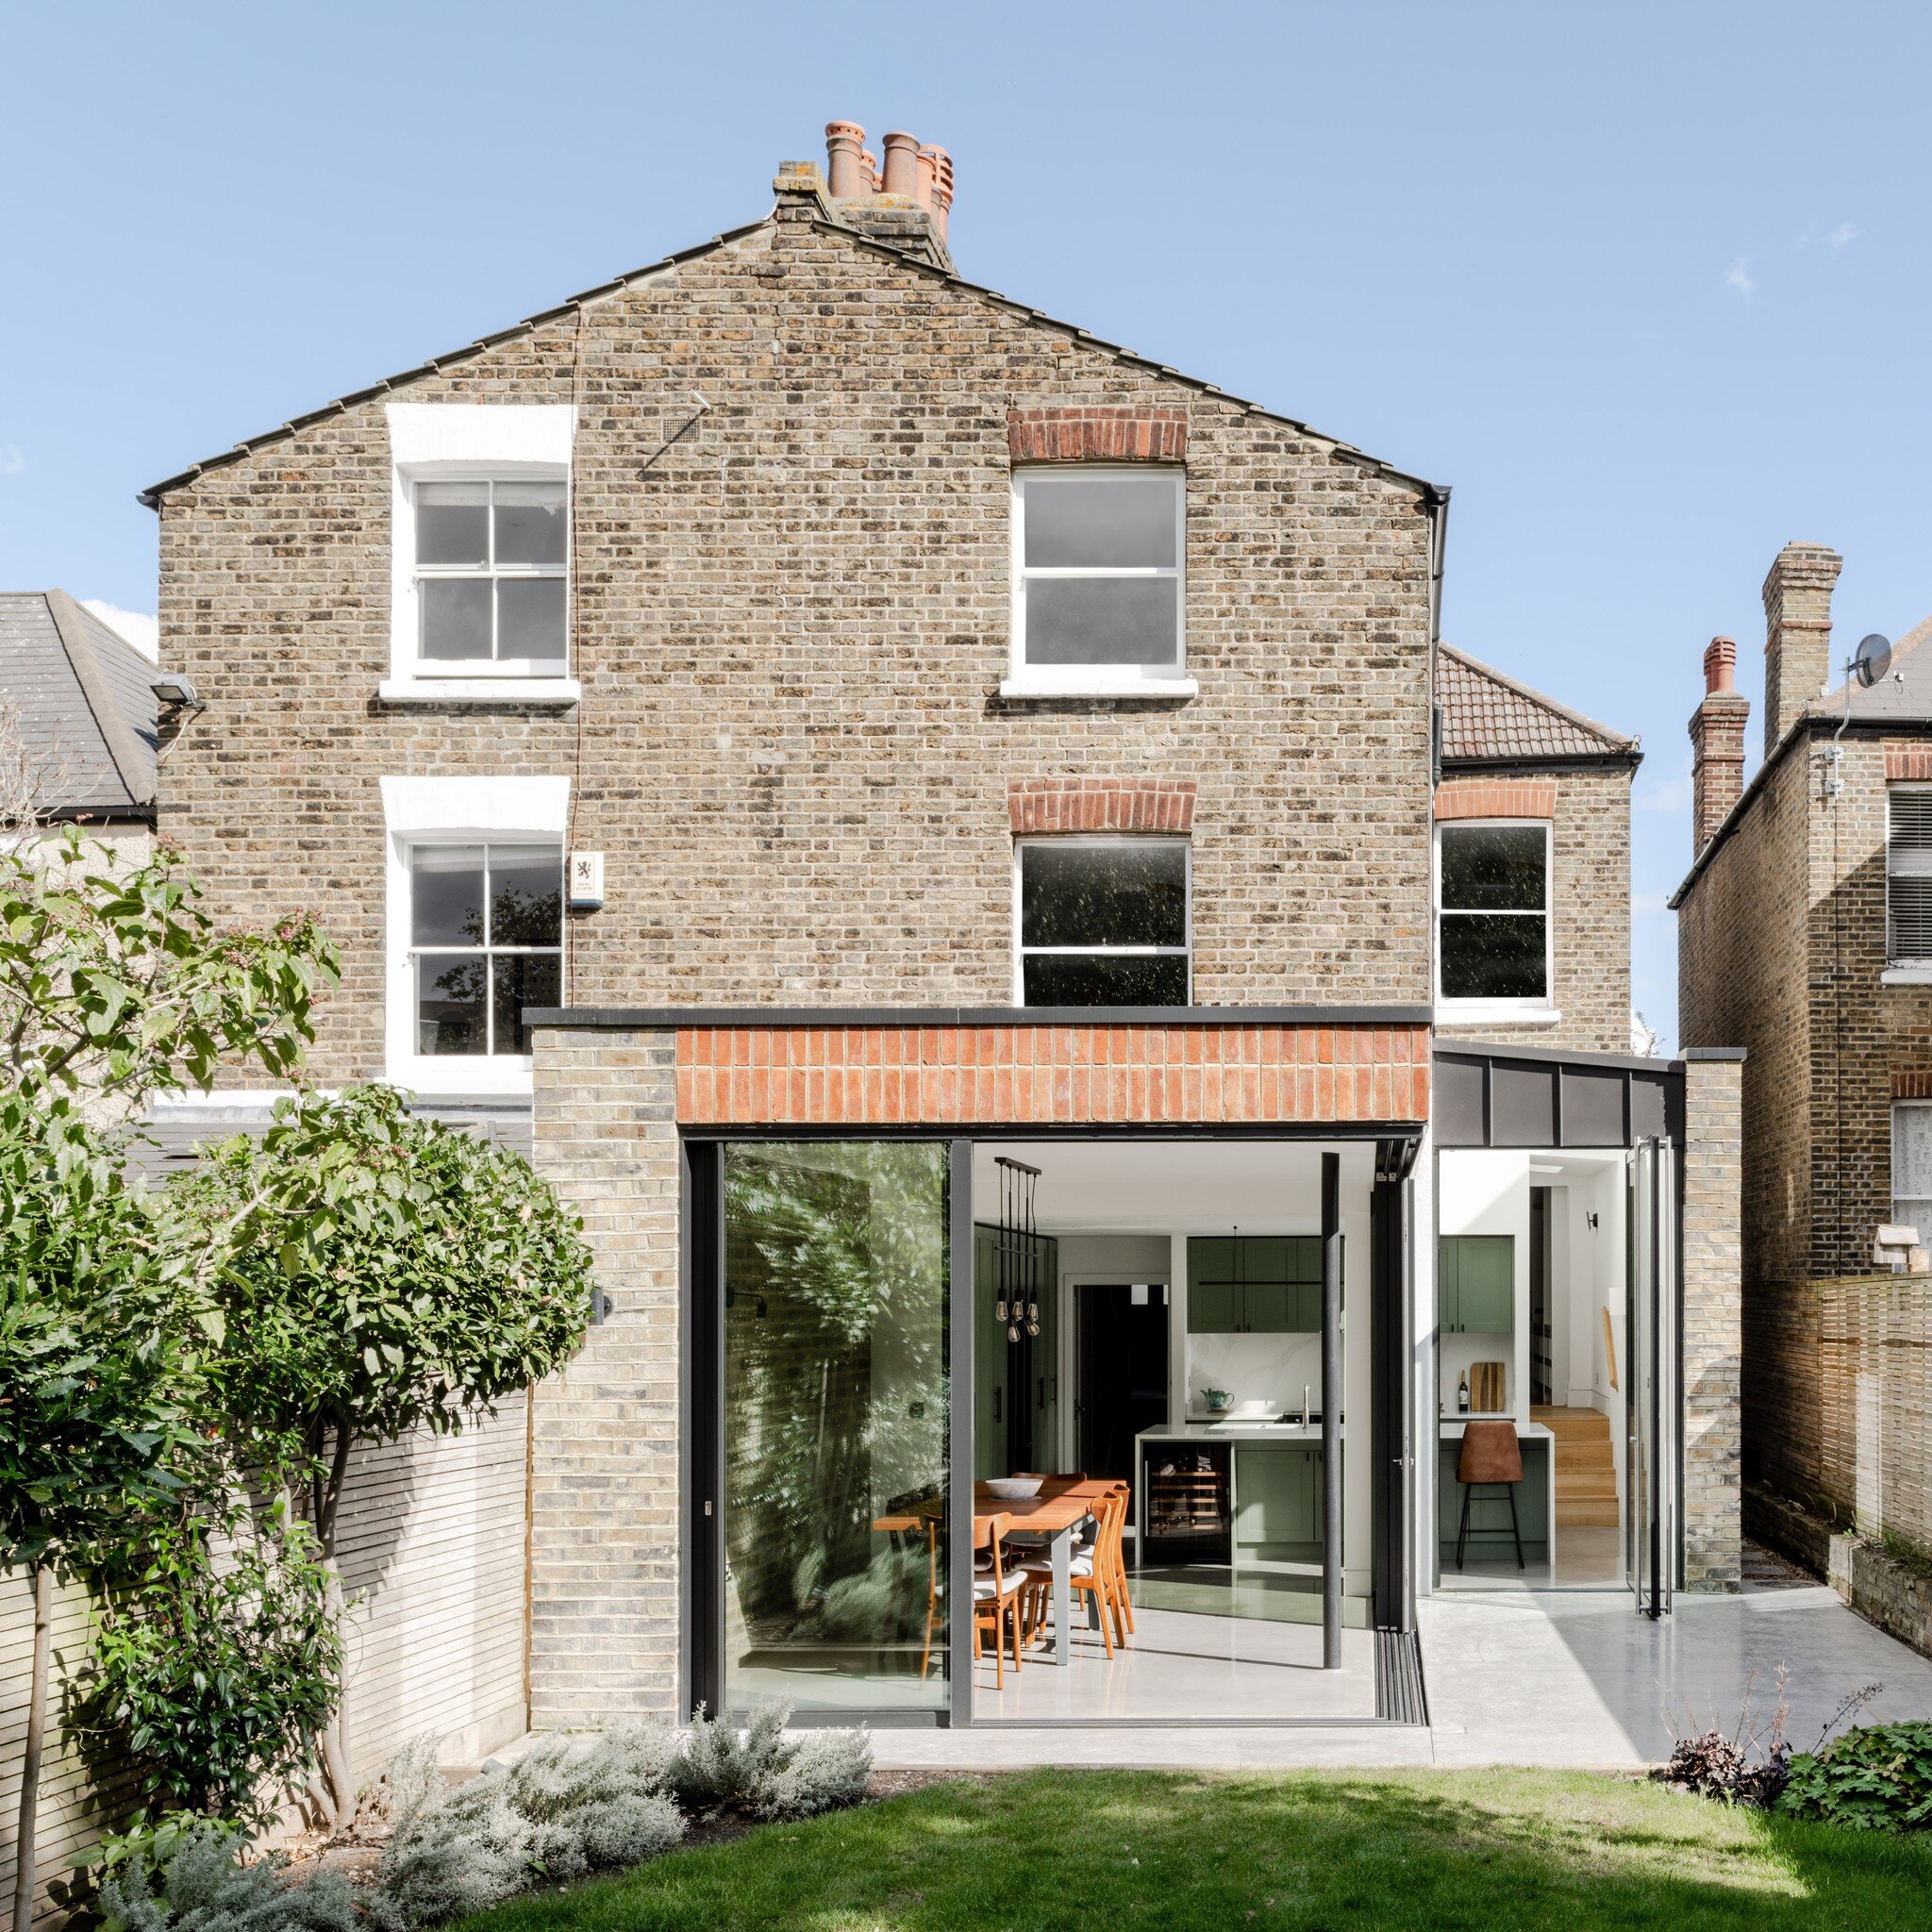 Best of 2023 - Dulwich House

Transforming a tired Victorian property in a conservation area into a beautiful home.

When asked what her favourite part of the project was, our client, Cassidy, said: &quot;I love the clean lines of the design, and how